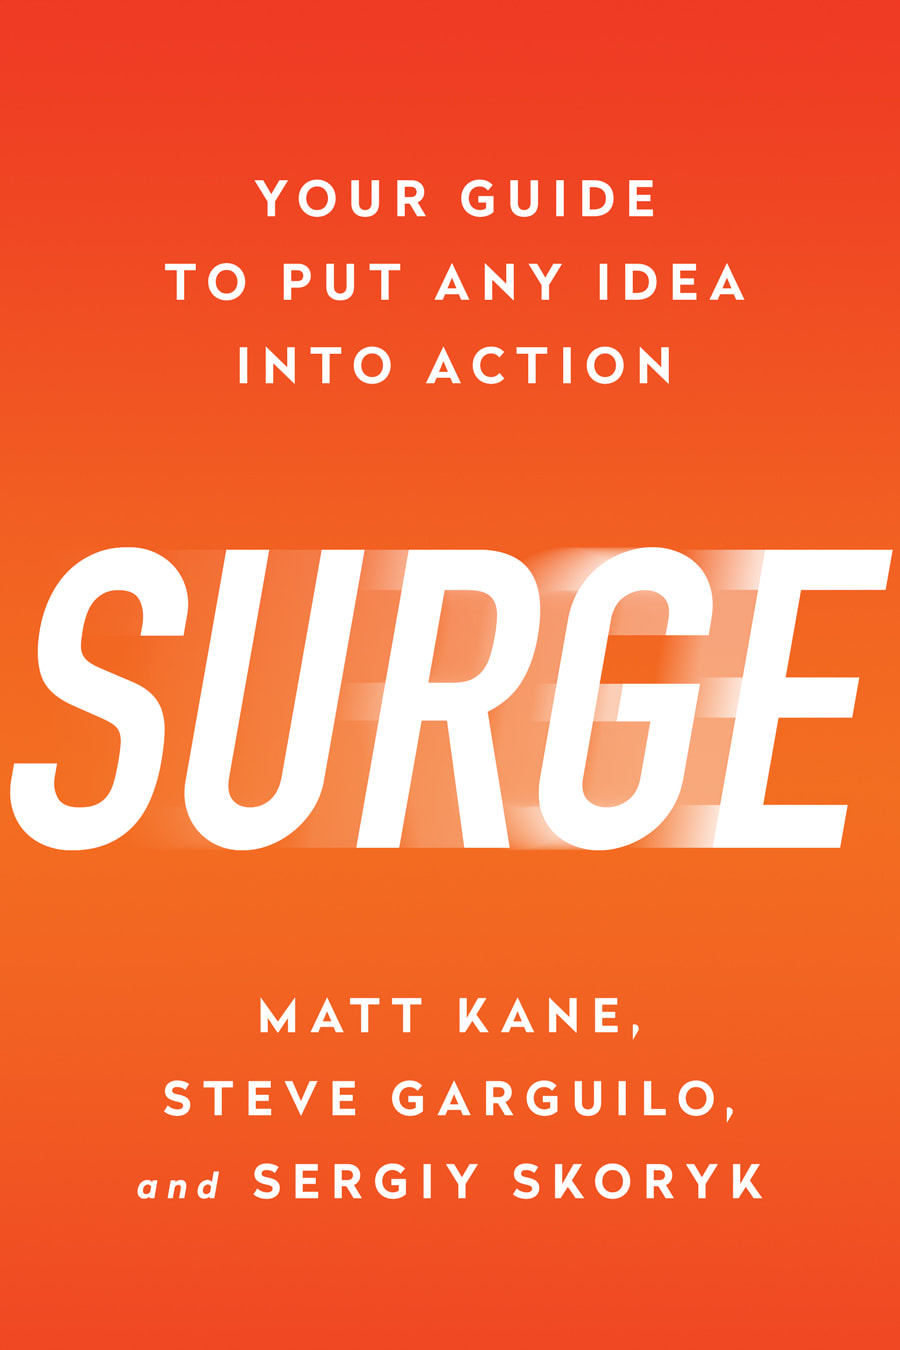 featured-in-book-surge-put-any-idea-into-action